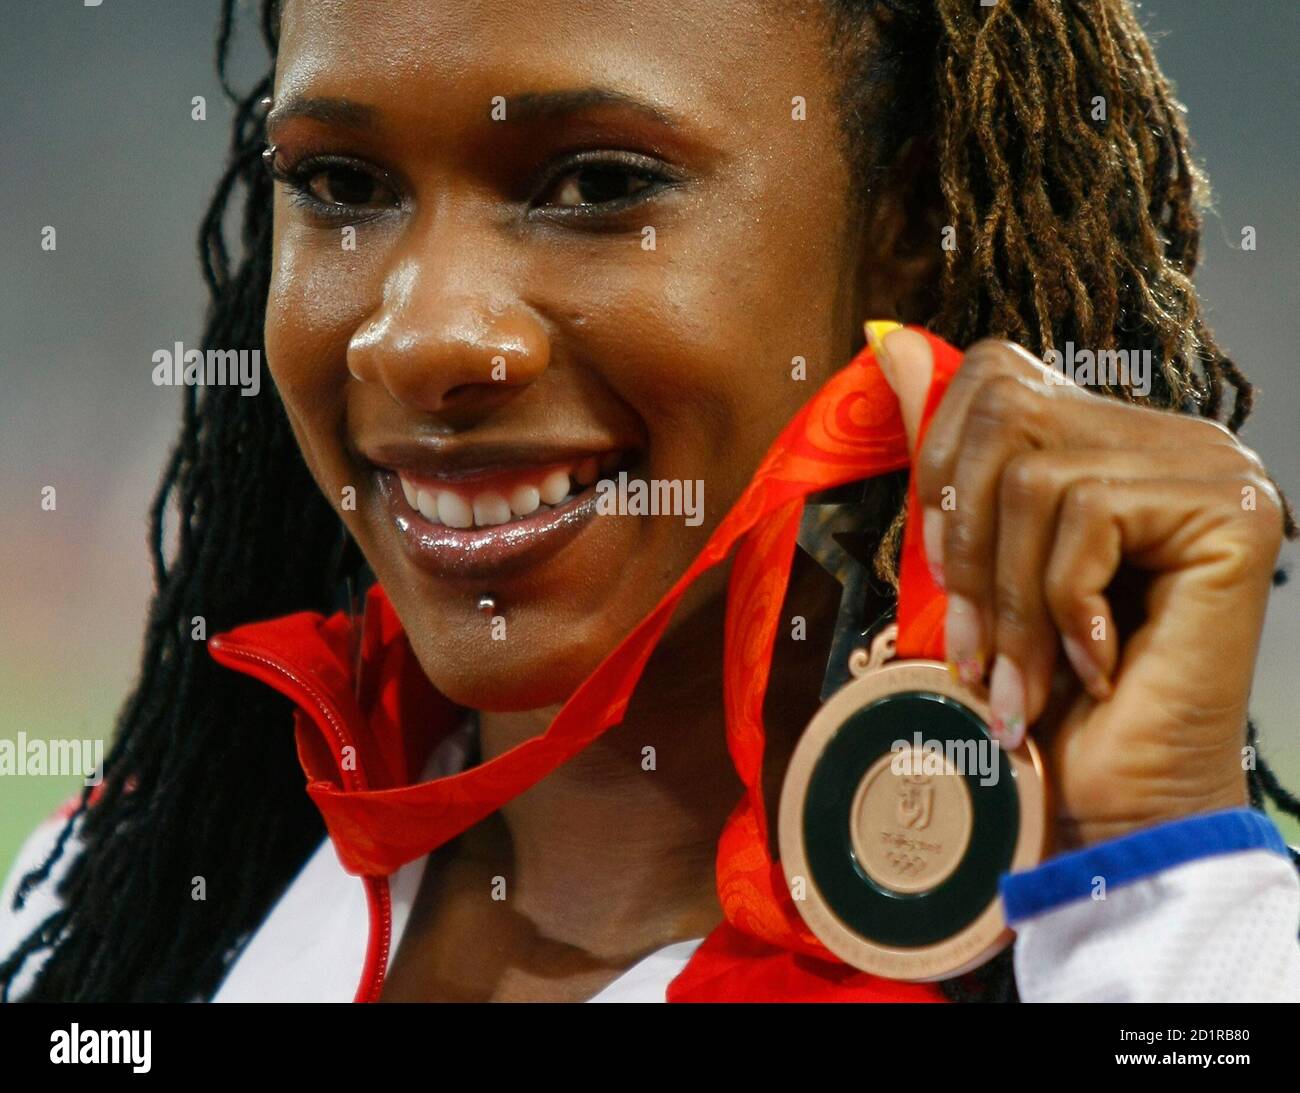 Bronze medallist Tasha Danvers of Britain poses during the medal ceremony for the women's 400m hurdles event of the athletics competition at the Beijing 2008 Olympic Games August 21, 2008.     REUTERS/Mike Blake (CHINA) Stock Photo